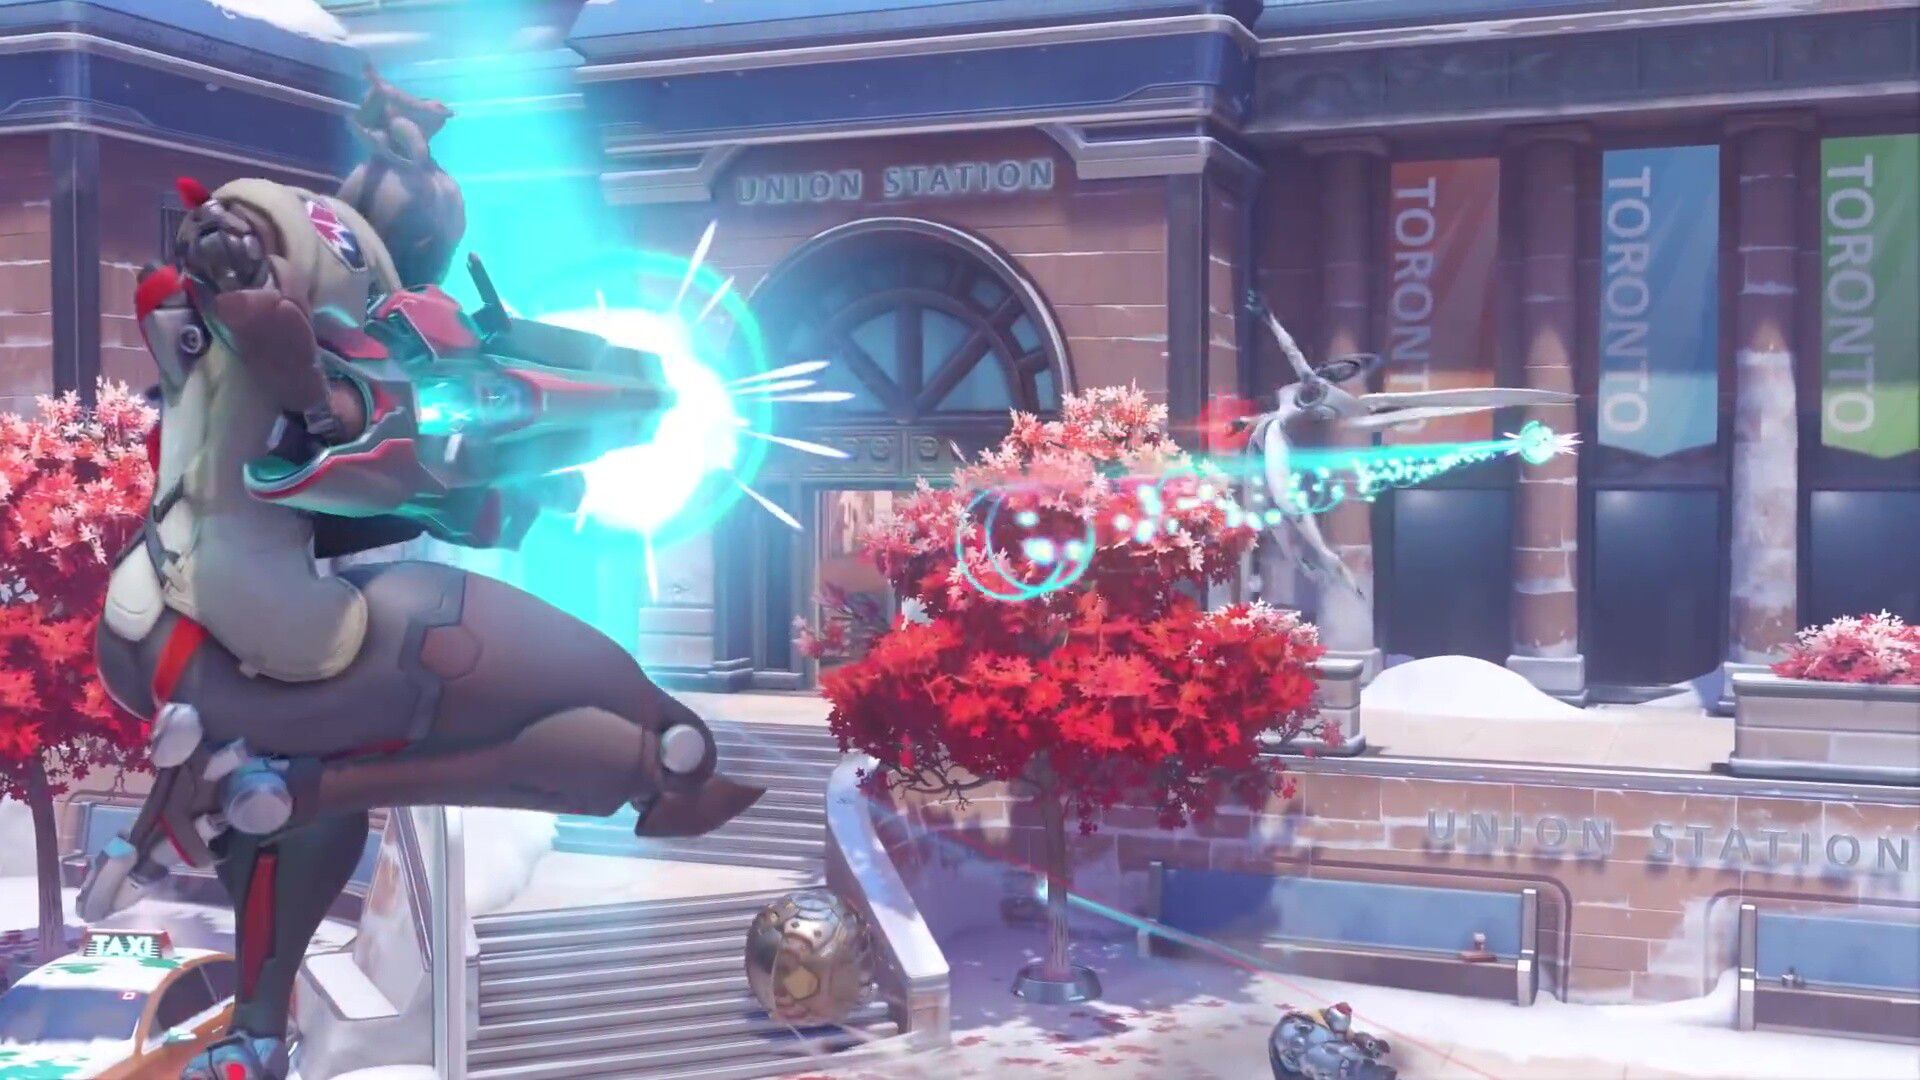 "Sojoan", a new character with a powerful rocket-equipped thigh with a whip whip of the Overwatch 2 machine 22